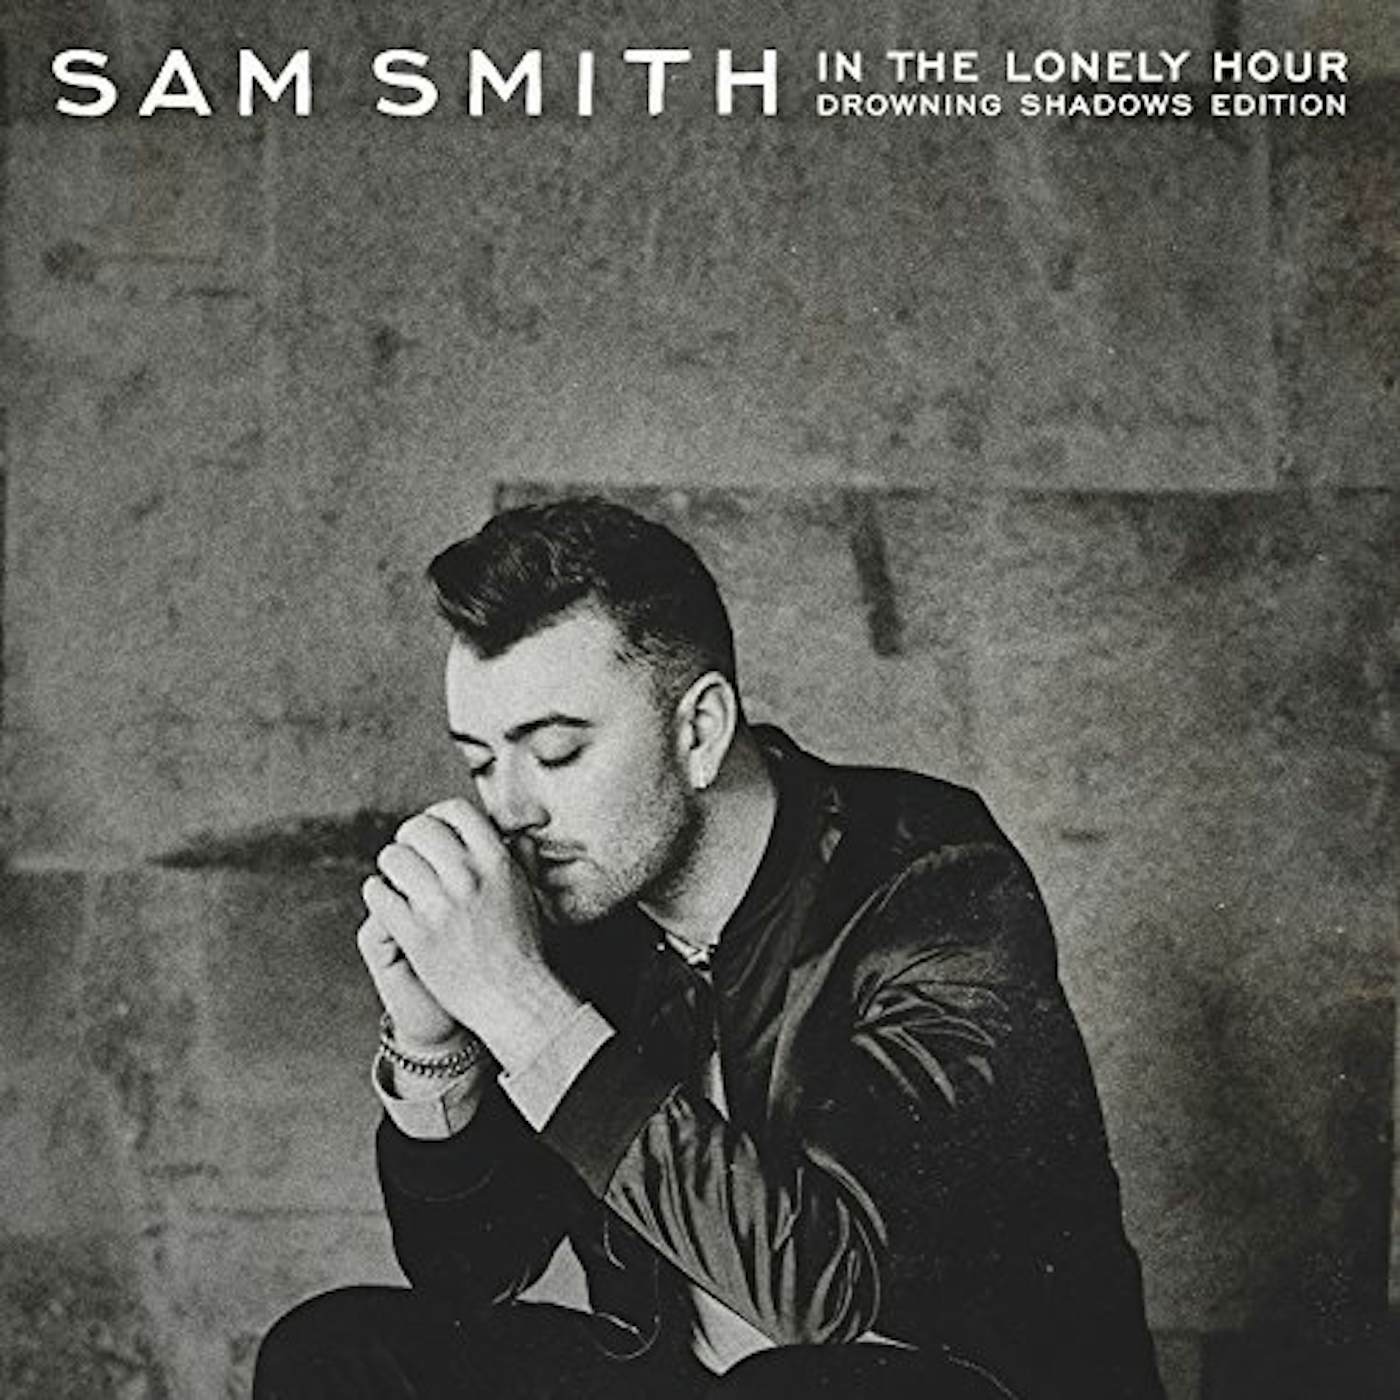 Sam Smith IN THE LONELY HOUR: DROWNING SHADOWS EDITION Vinyl Record